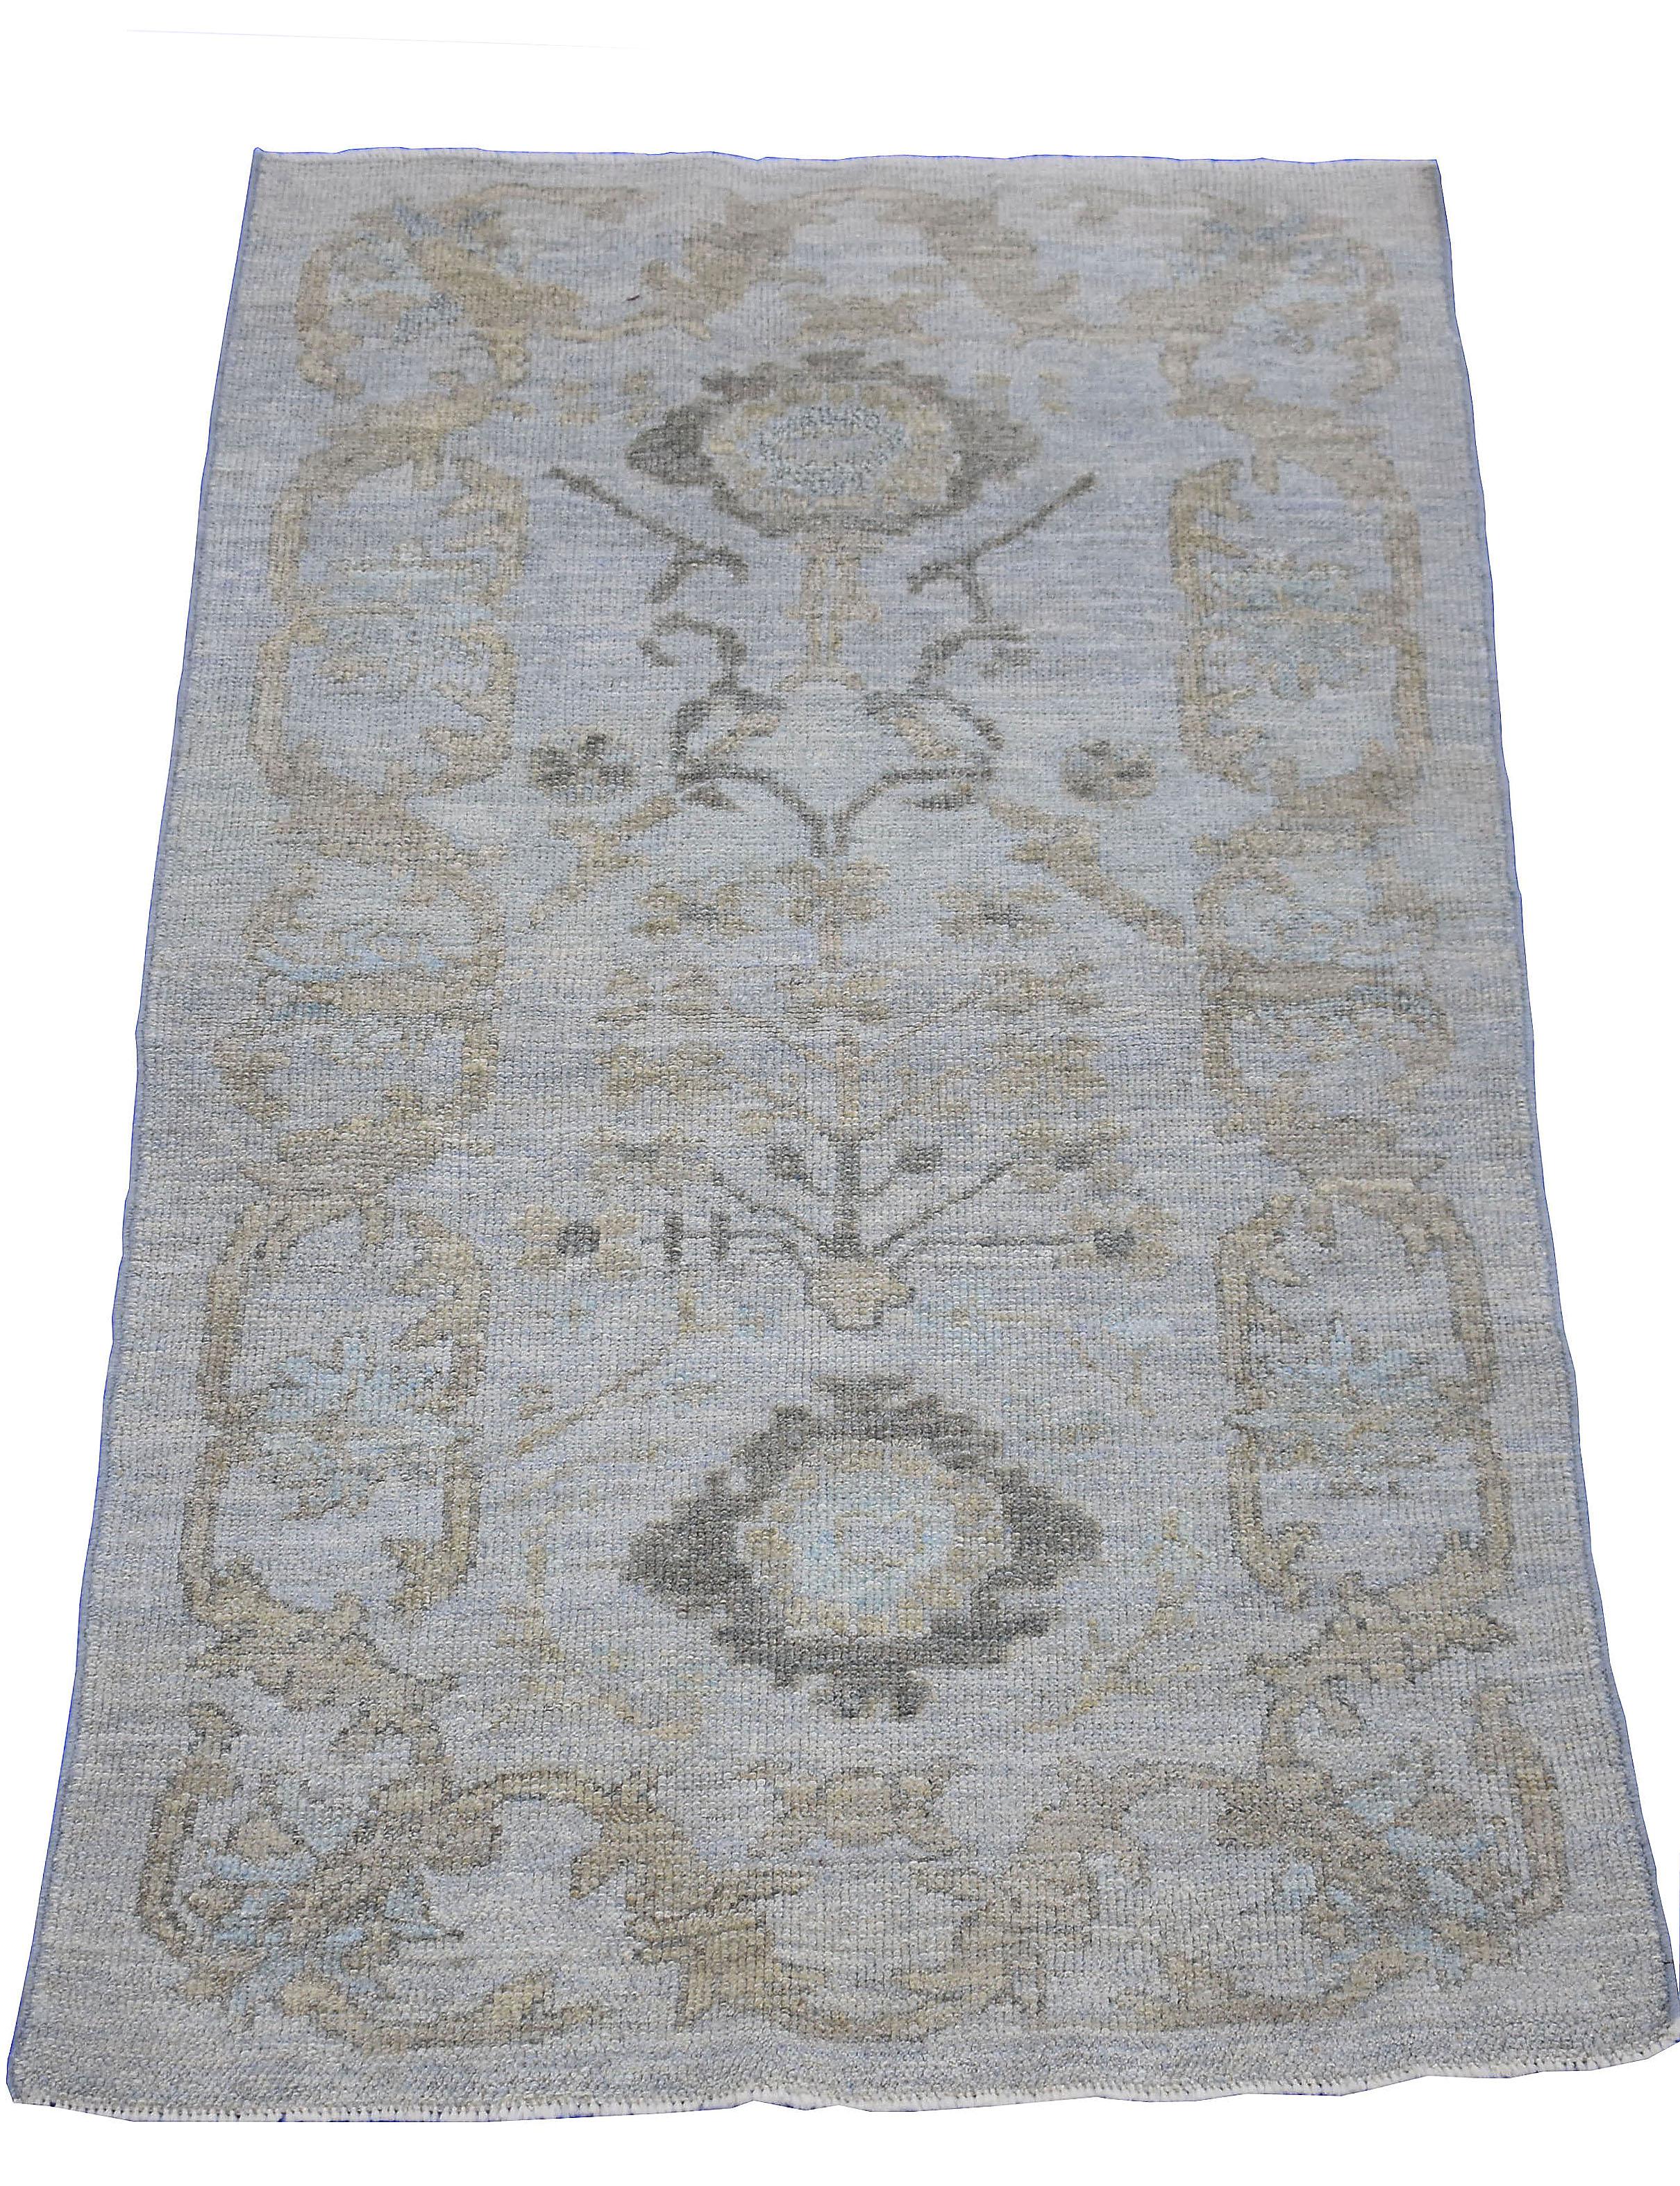 Hand-Woven Contemporary Oushak Rug with Beige and Gray Flower Medallions  For Sale